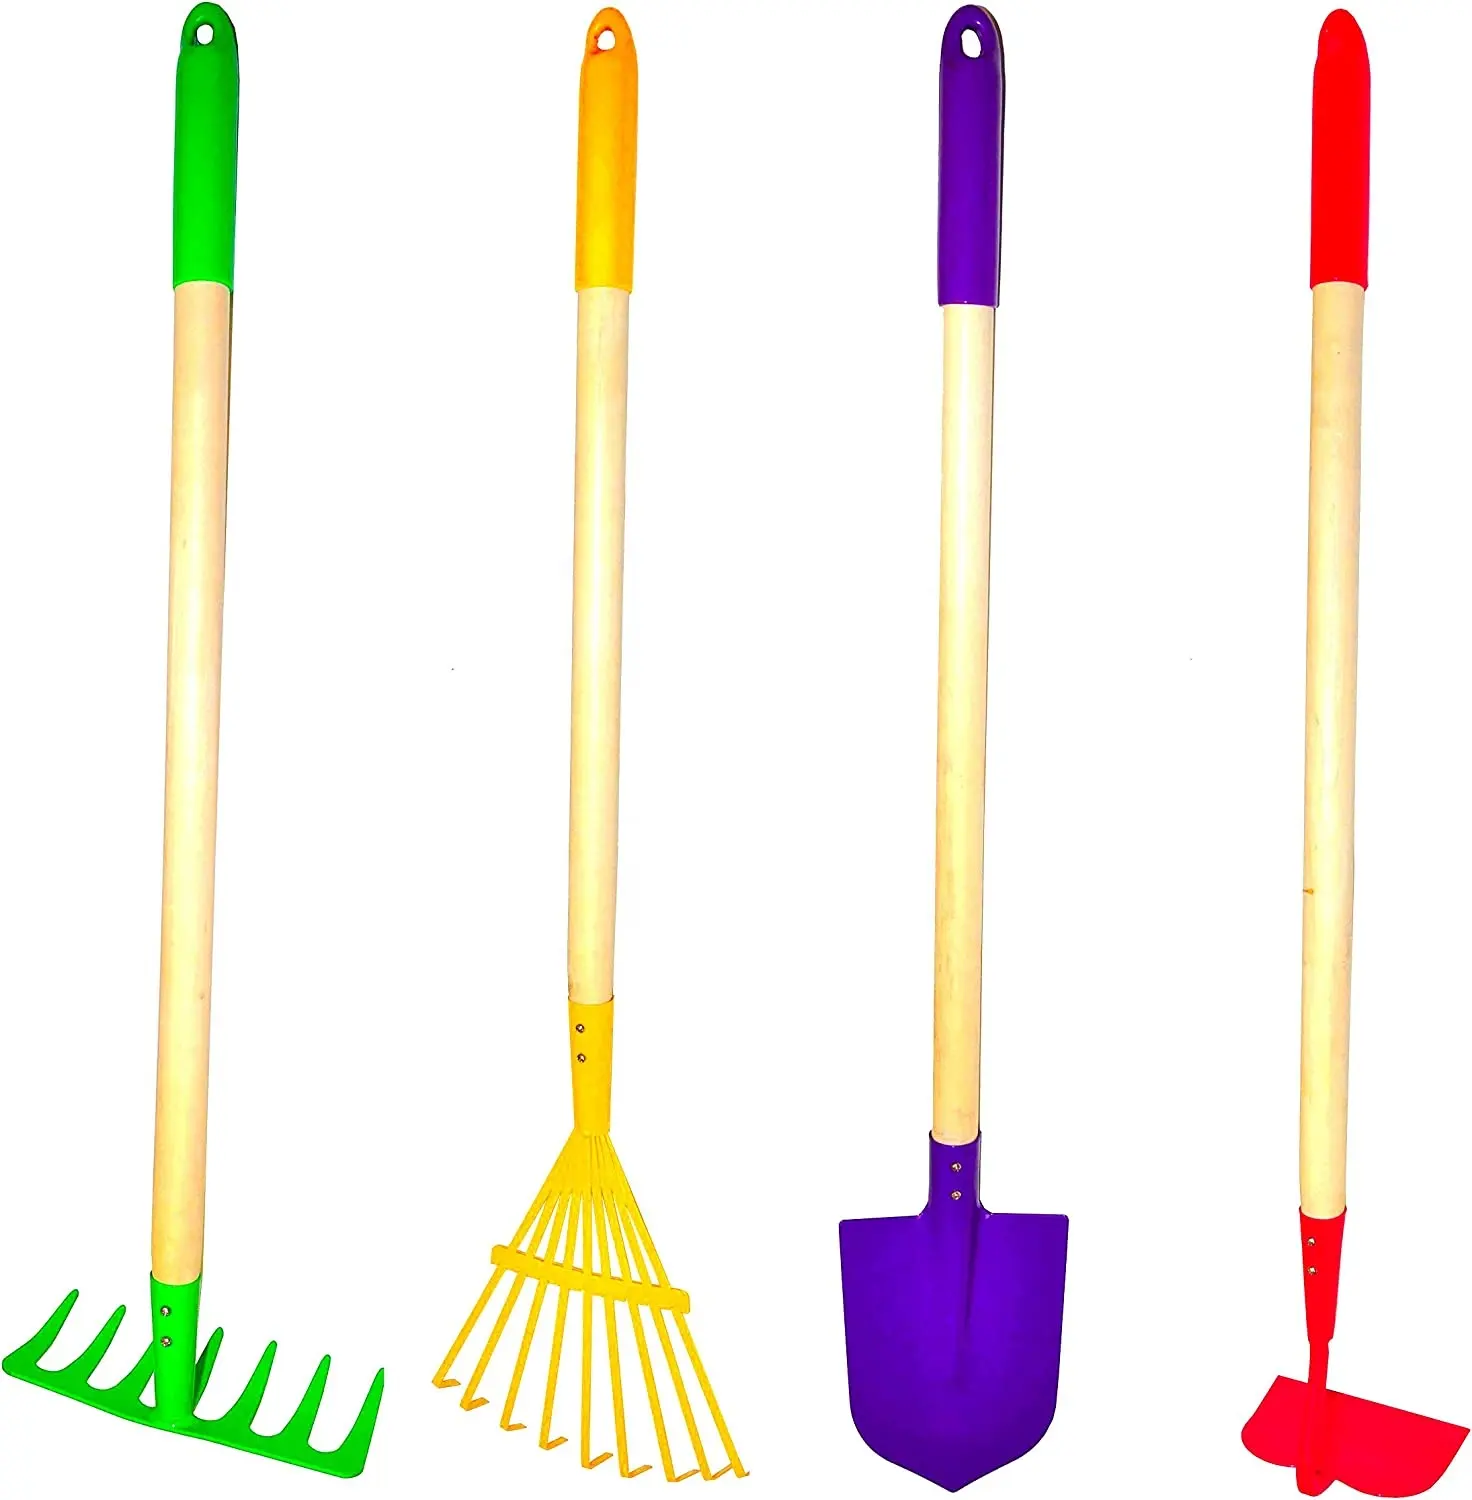 Kids Garden Tool Set Toy, Rake, Spade, Hoe and Leaf Rake made of sturdy steel heads and real wood handle